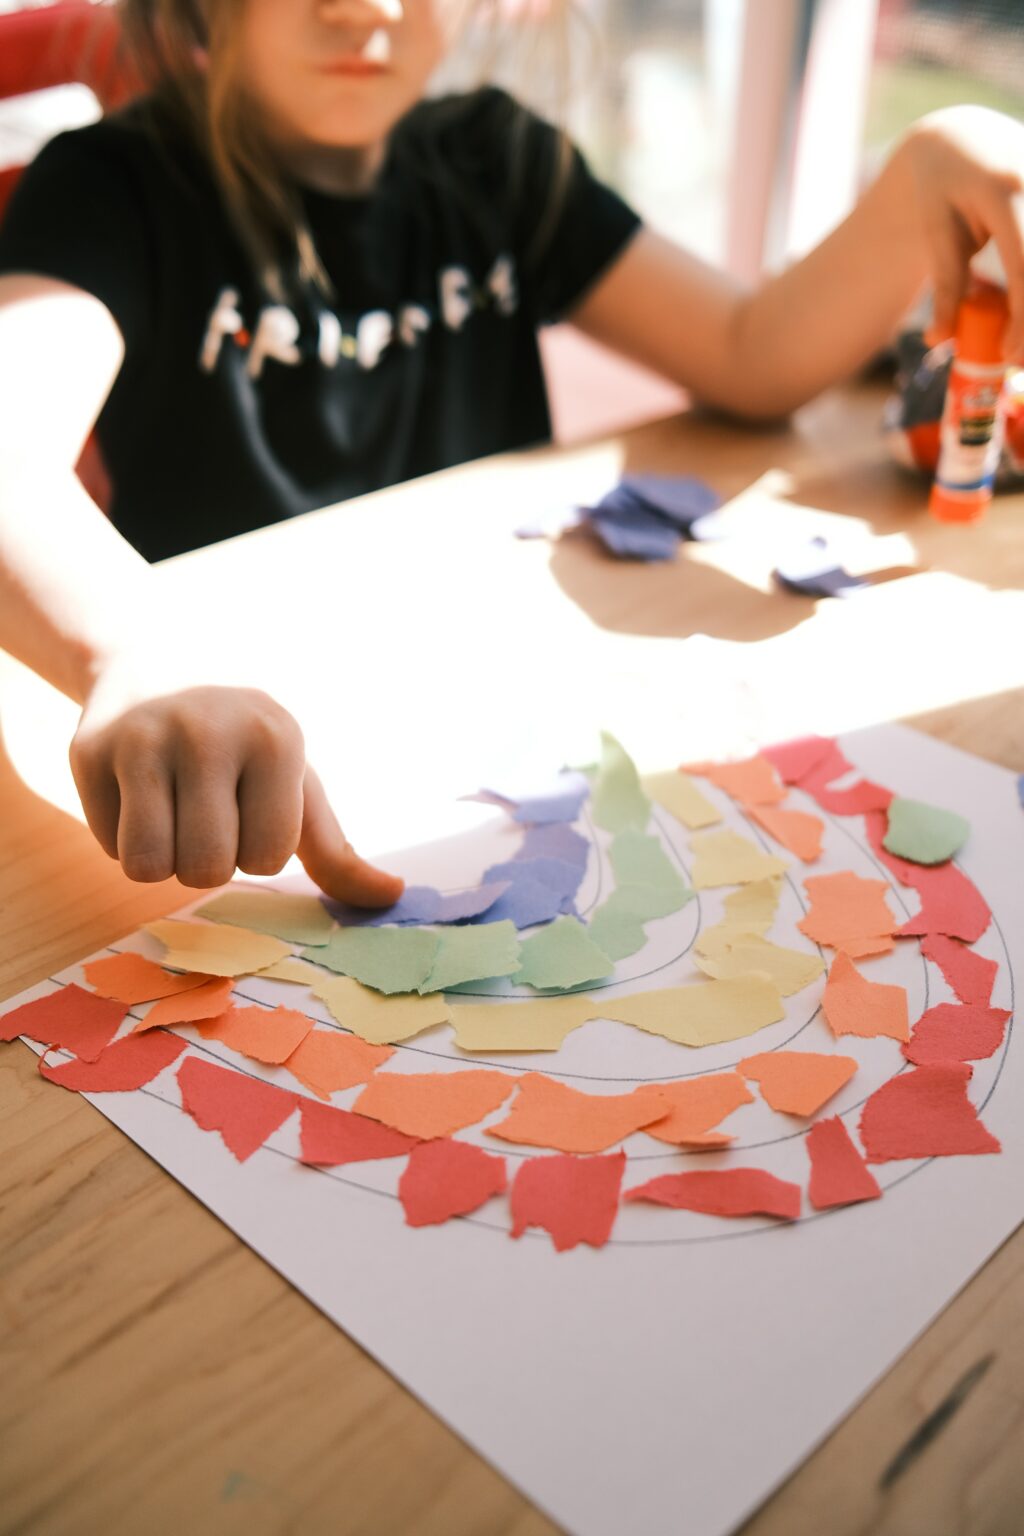 A child designing a rainbow map with colored papers